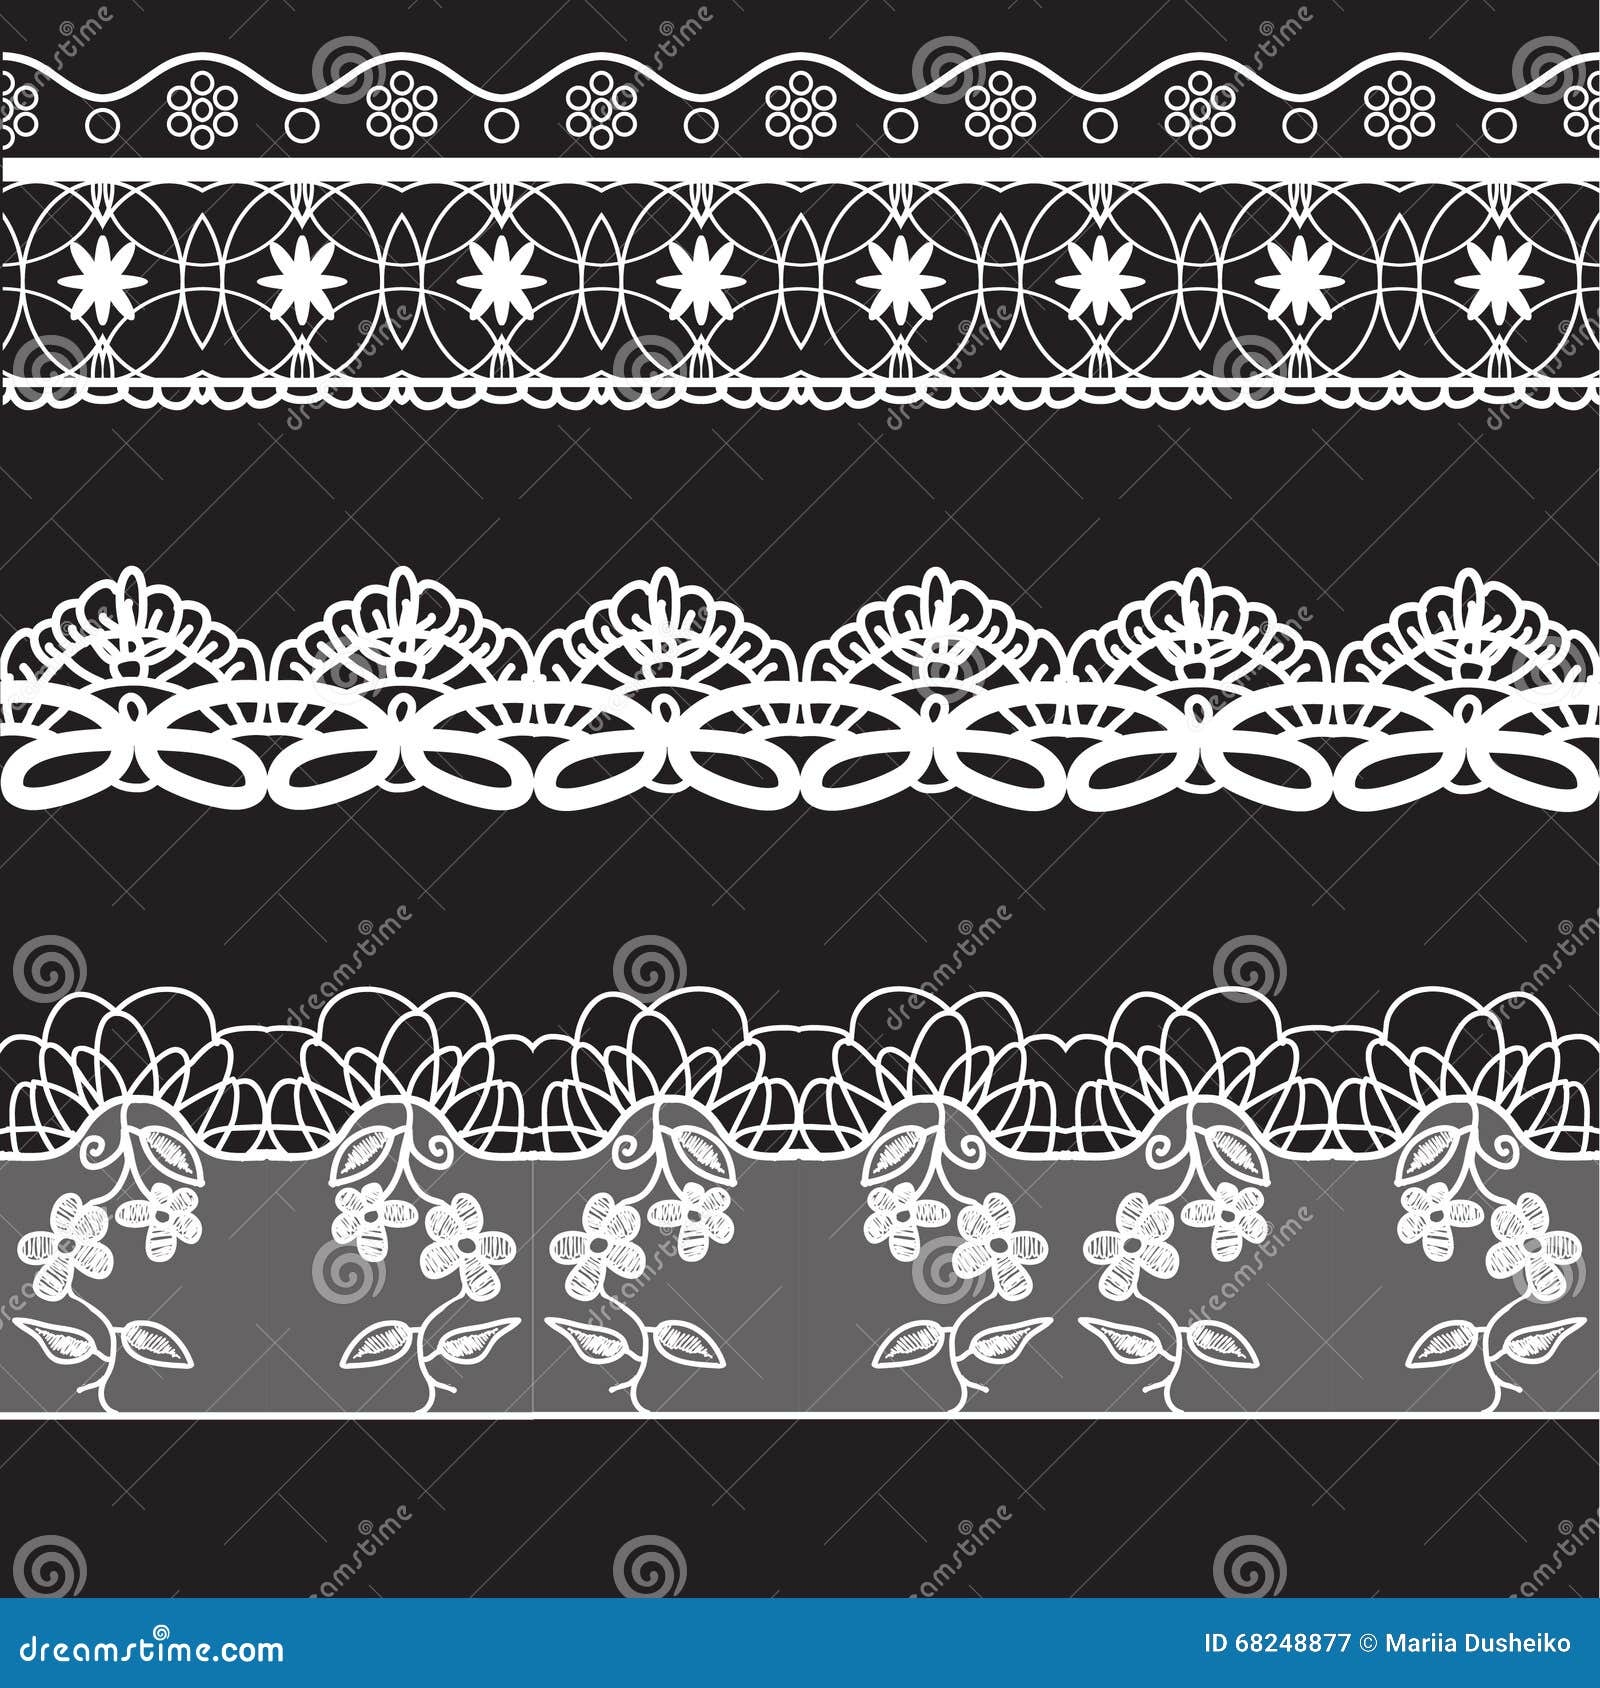 Download Lace Edge Vector Thread Knitting Stock Vector ...